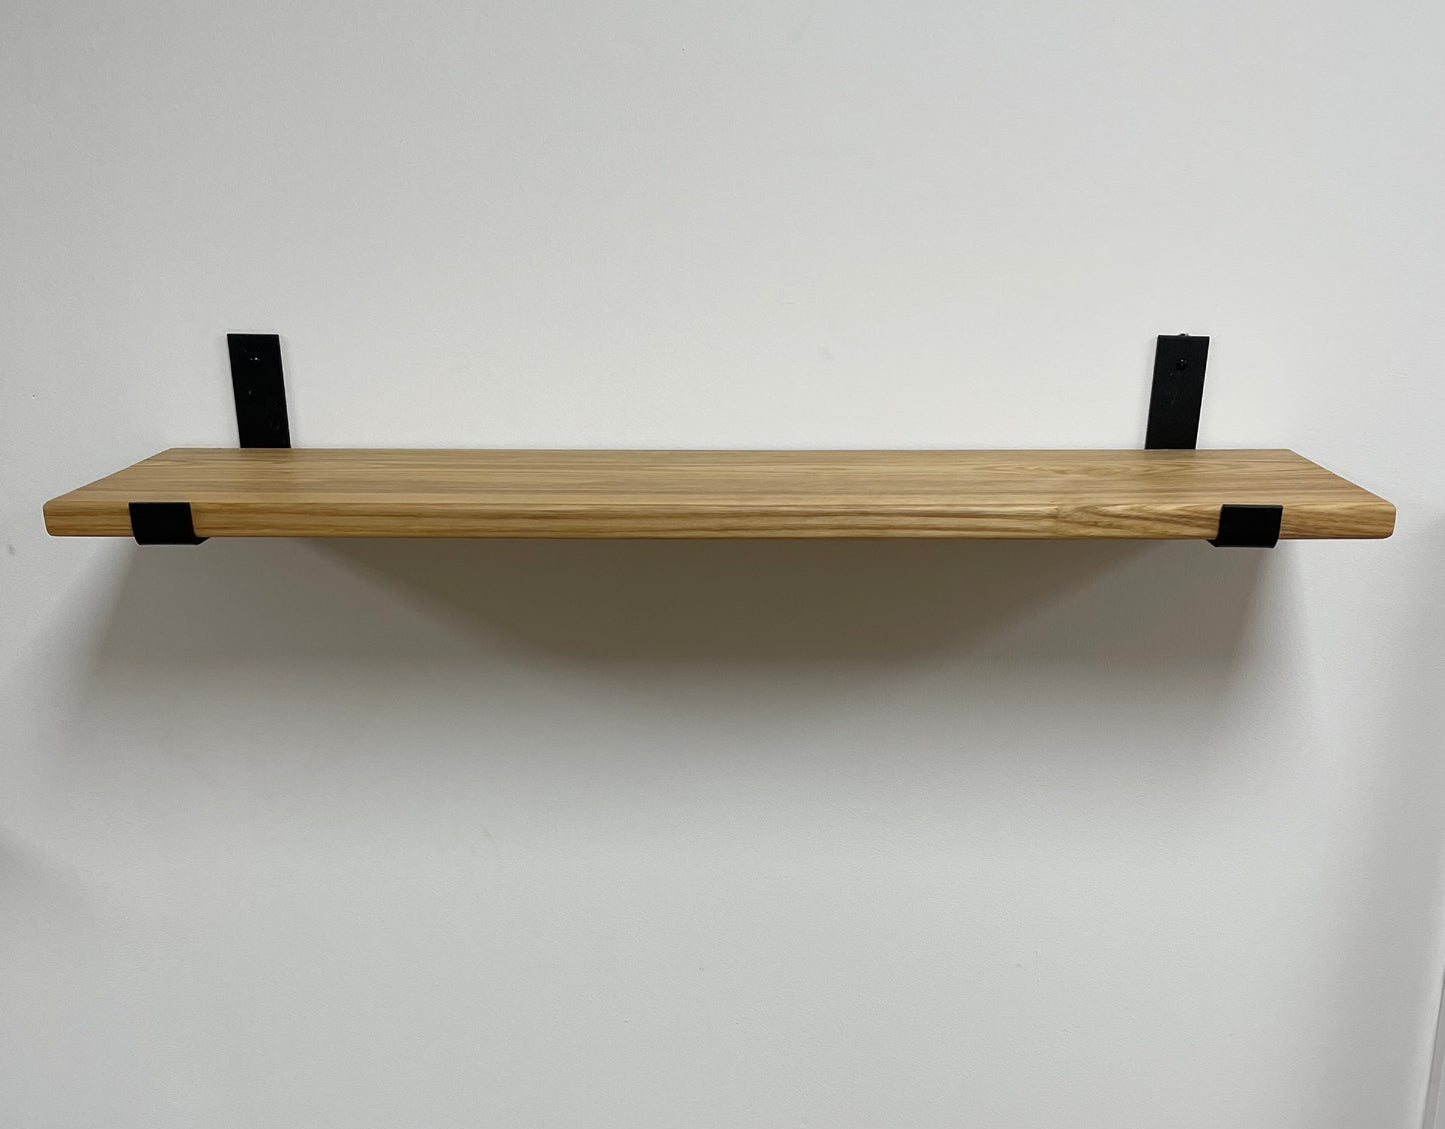 Premium American Ash Industrial Style Shelf with Lipped Up Brackets, 20-25mm (1 Inch) Depth